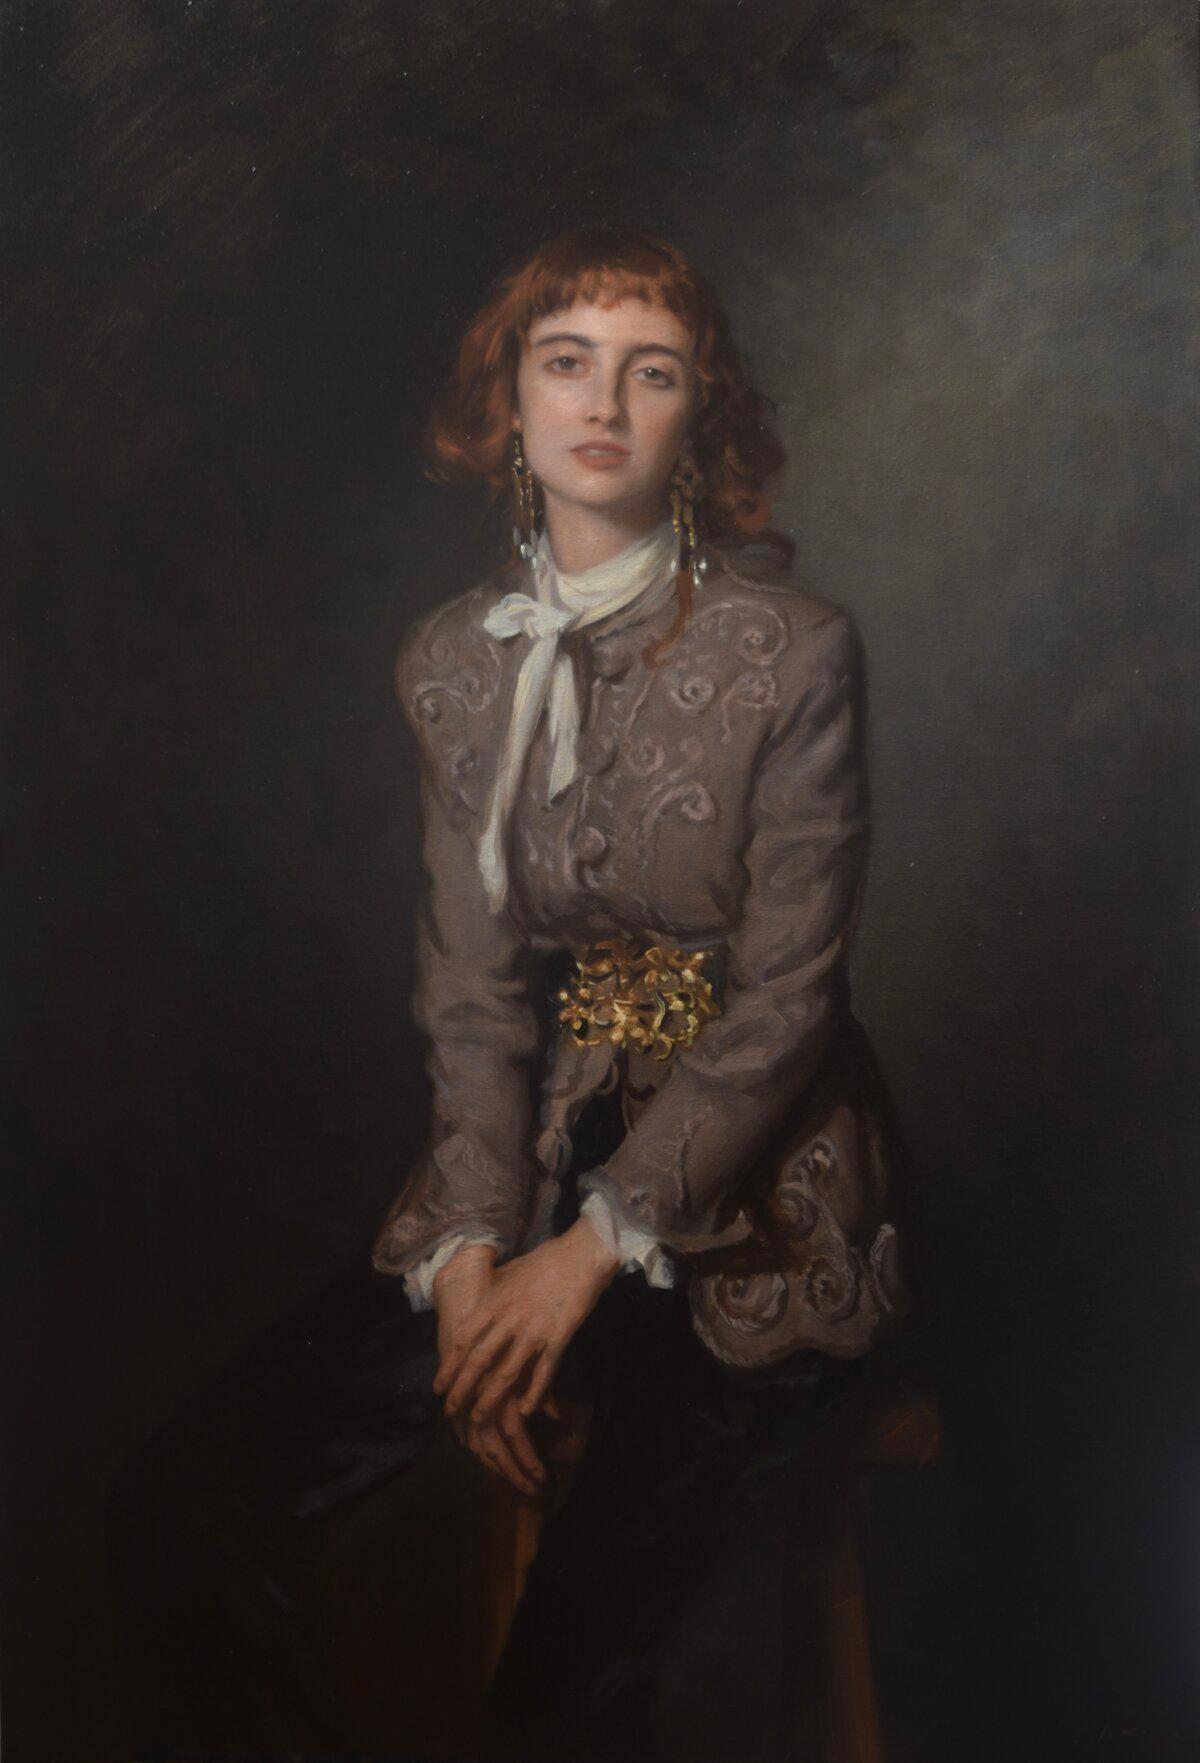 “Daisy” by Isabella Watling of London. Oil on canvas; 55 inches by 37.4 inches. (Courtesy of the Portrait Society of America)